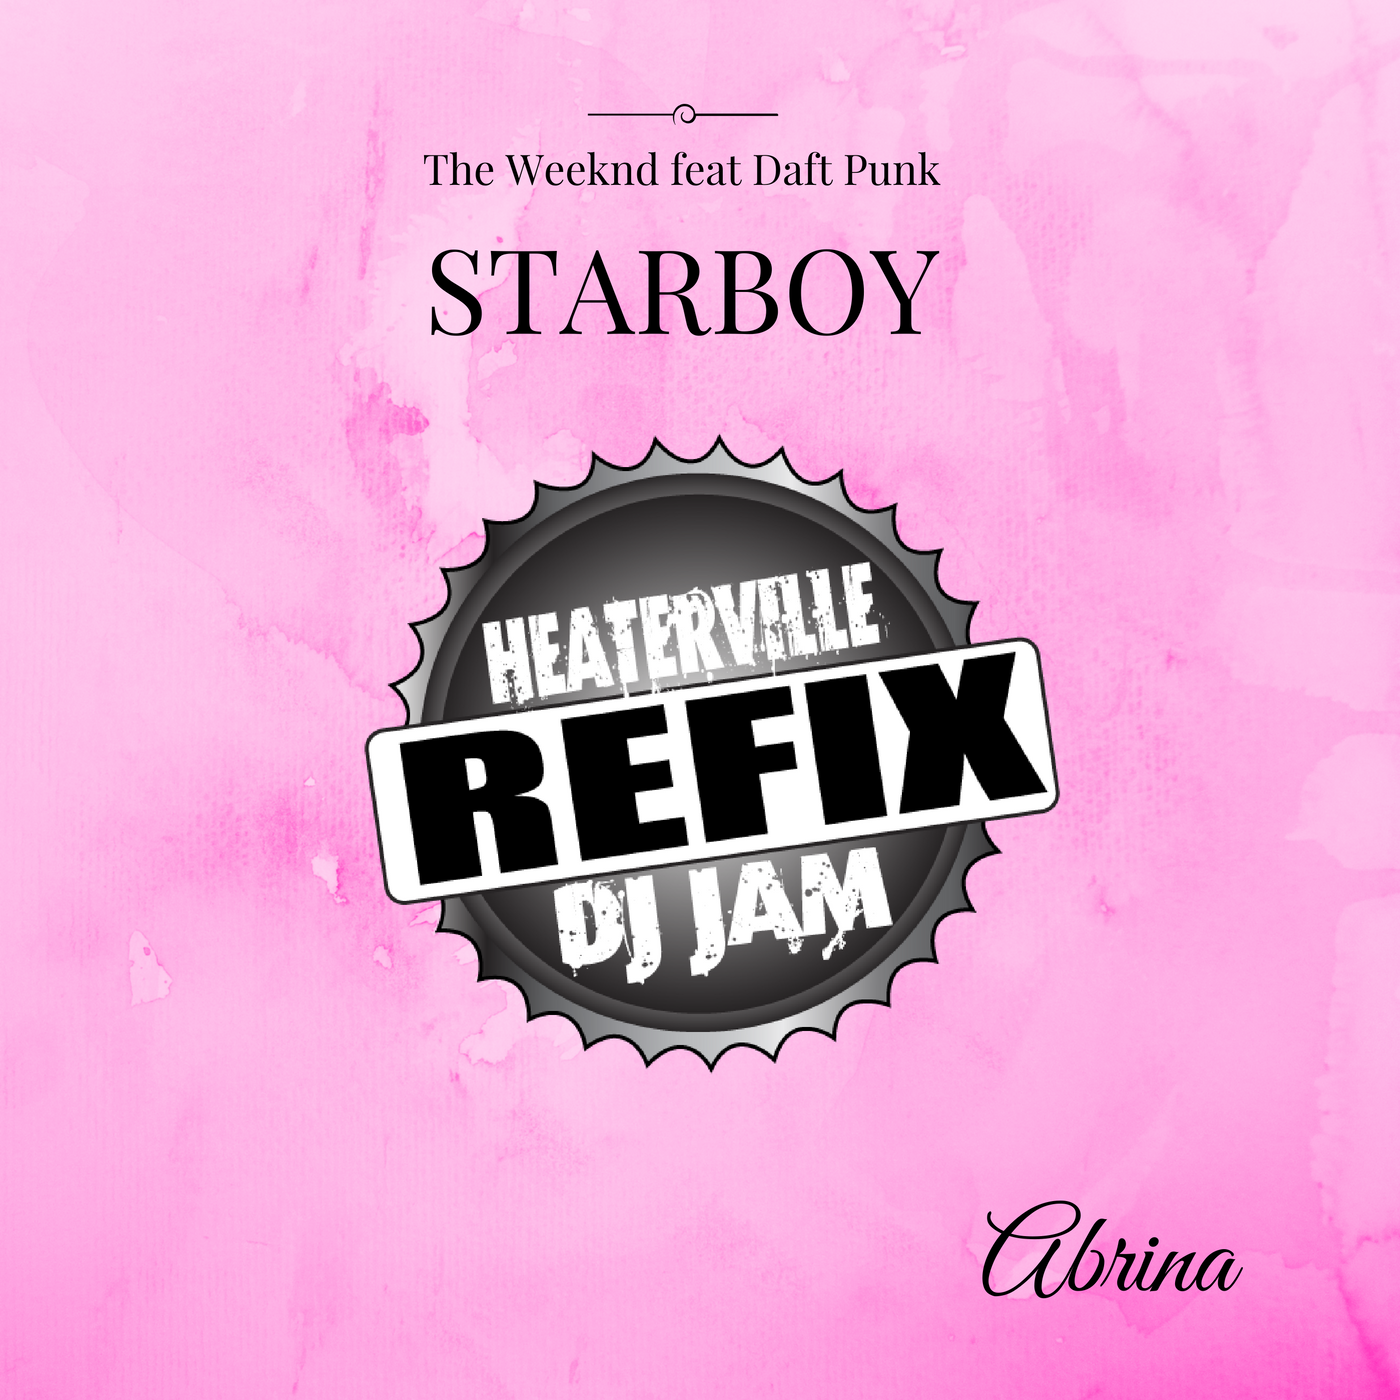 The Weekend f Daft Punk “Starboy” with Abrina